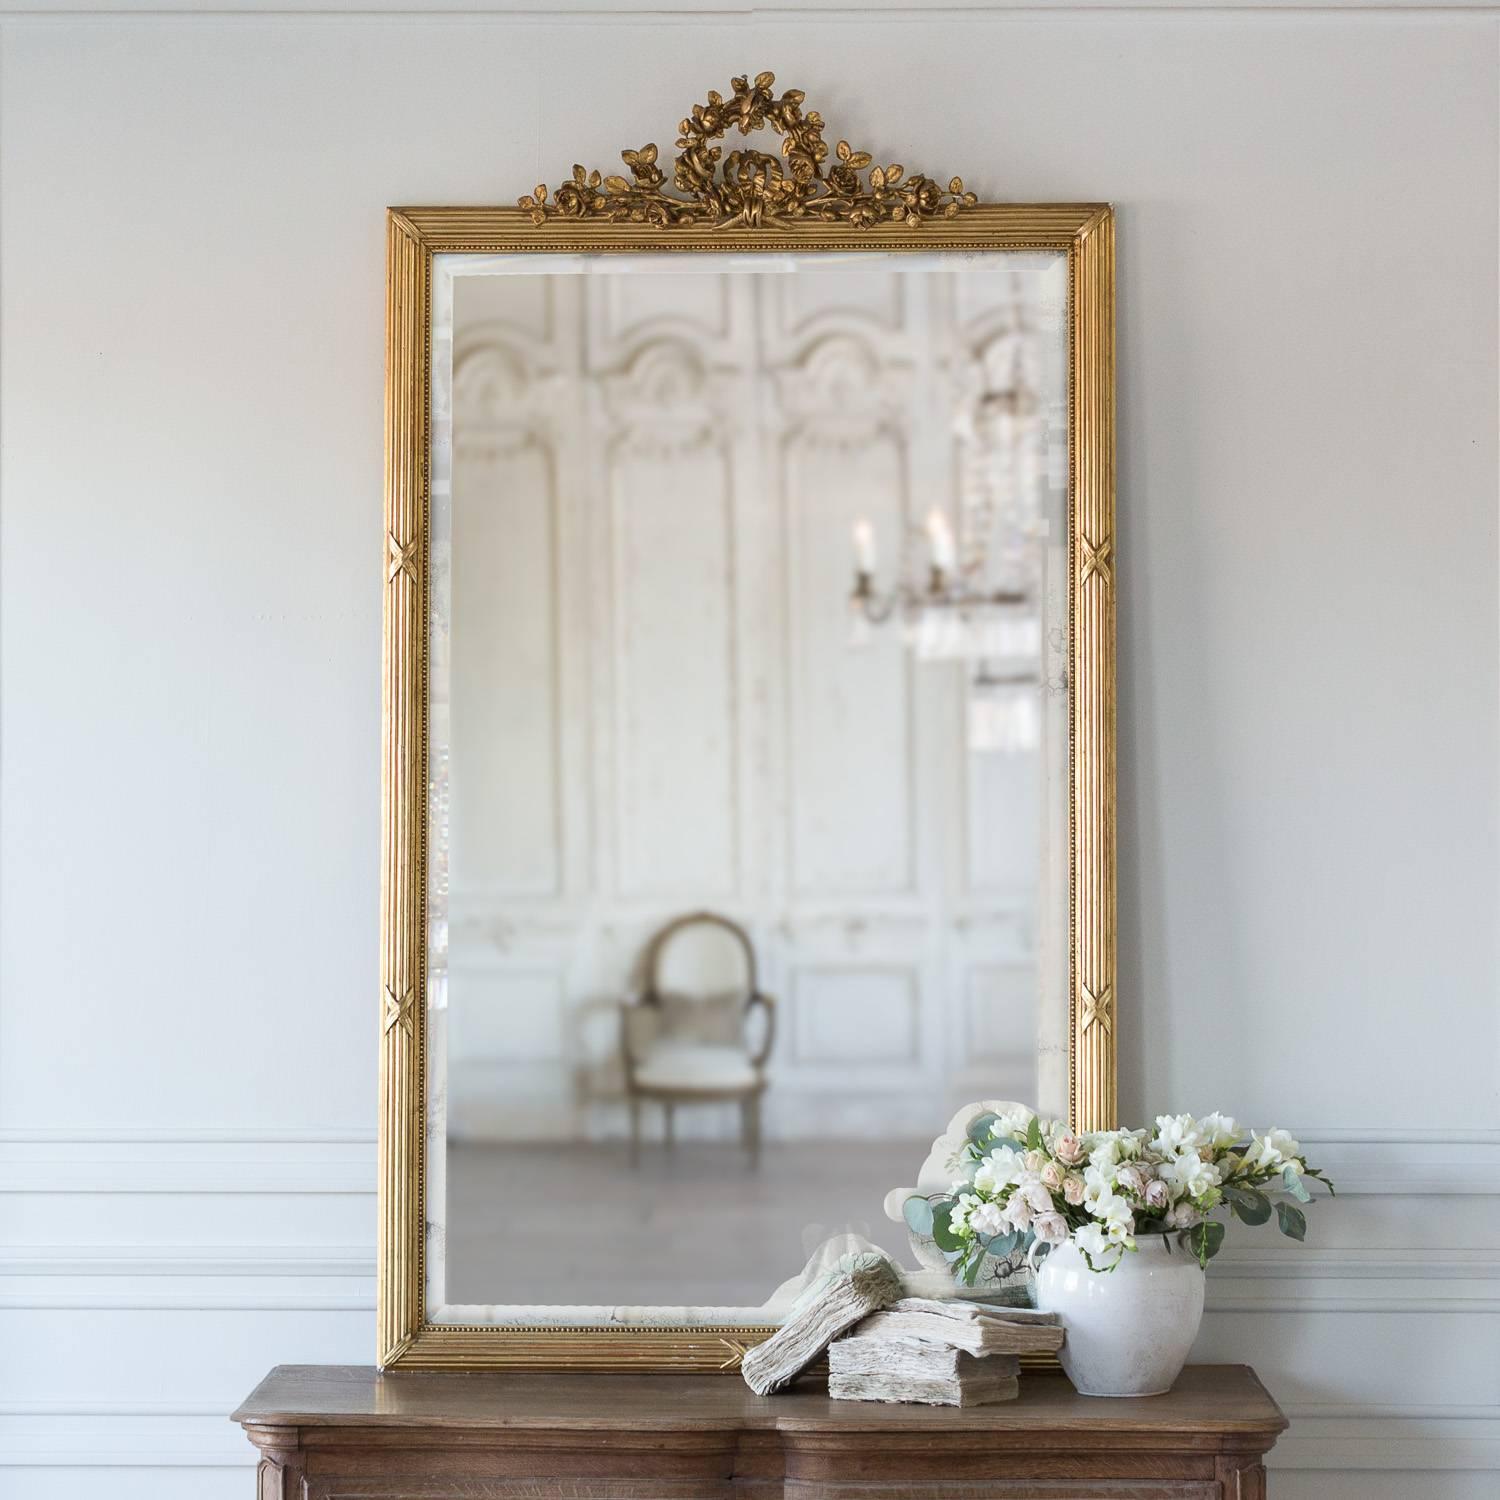 Bevelled glass mirror with a large, elaborate crest. A sweet rose motif crowns the top of this otherwise simple mirror. Bows on the frame break up the long lines of column design. The original, bevelled mercury glass shows a significant amount of